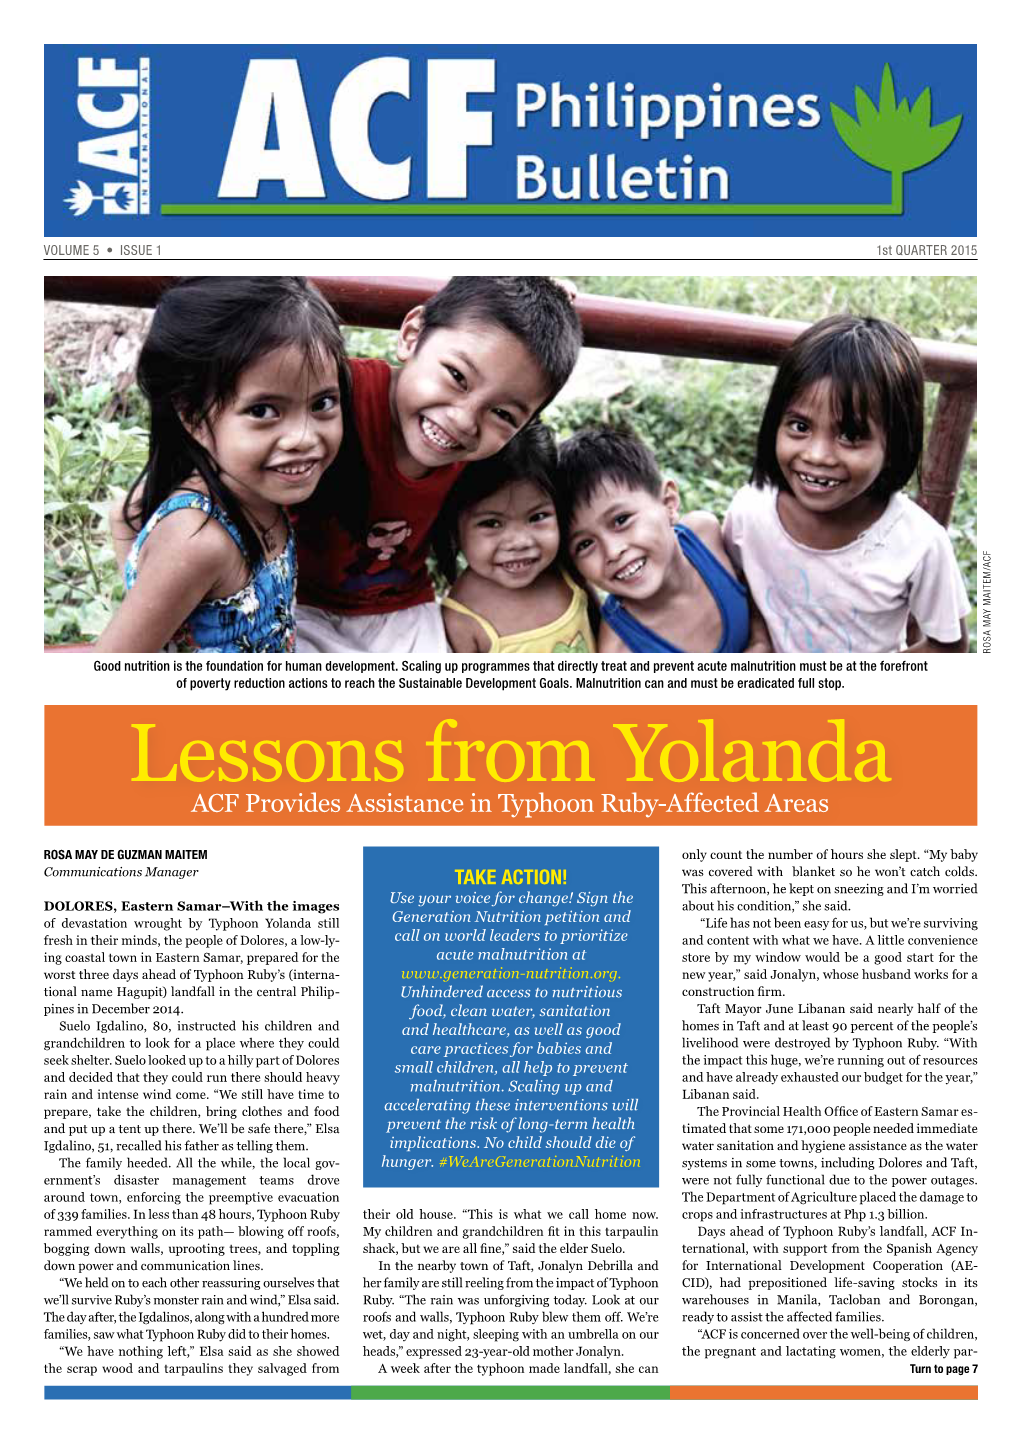 Lessons from Yolanda ACF Provides Assistance in Typhoon Ruby-Affected Areas